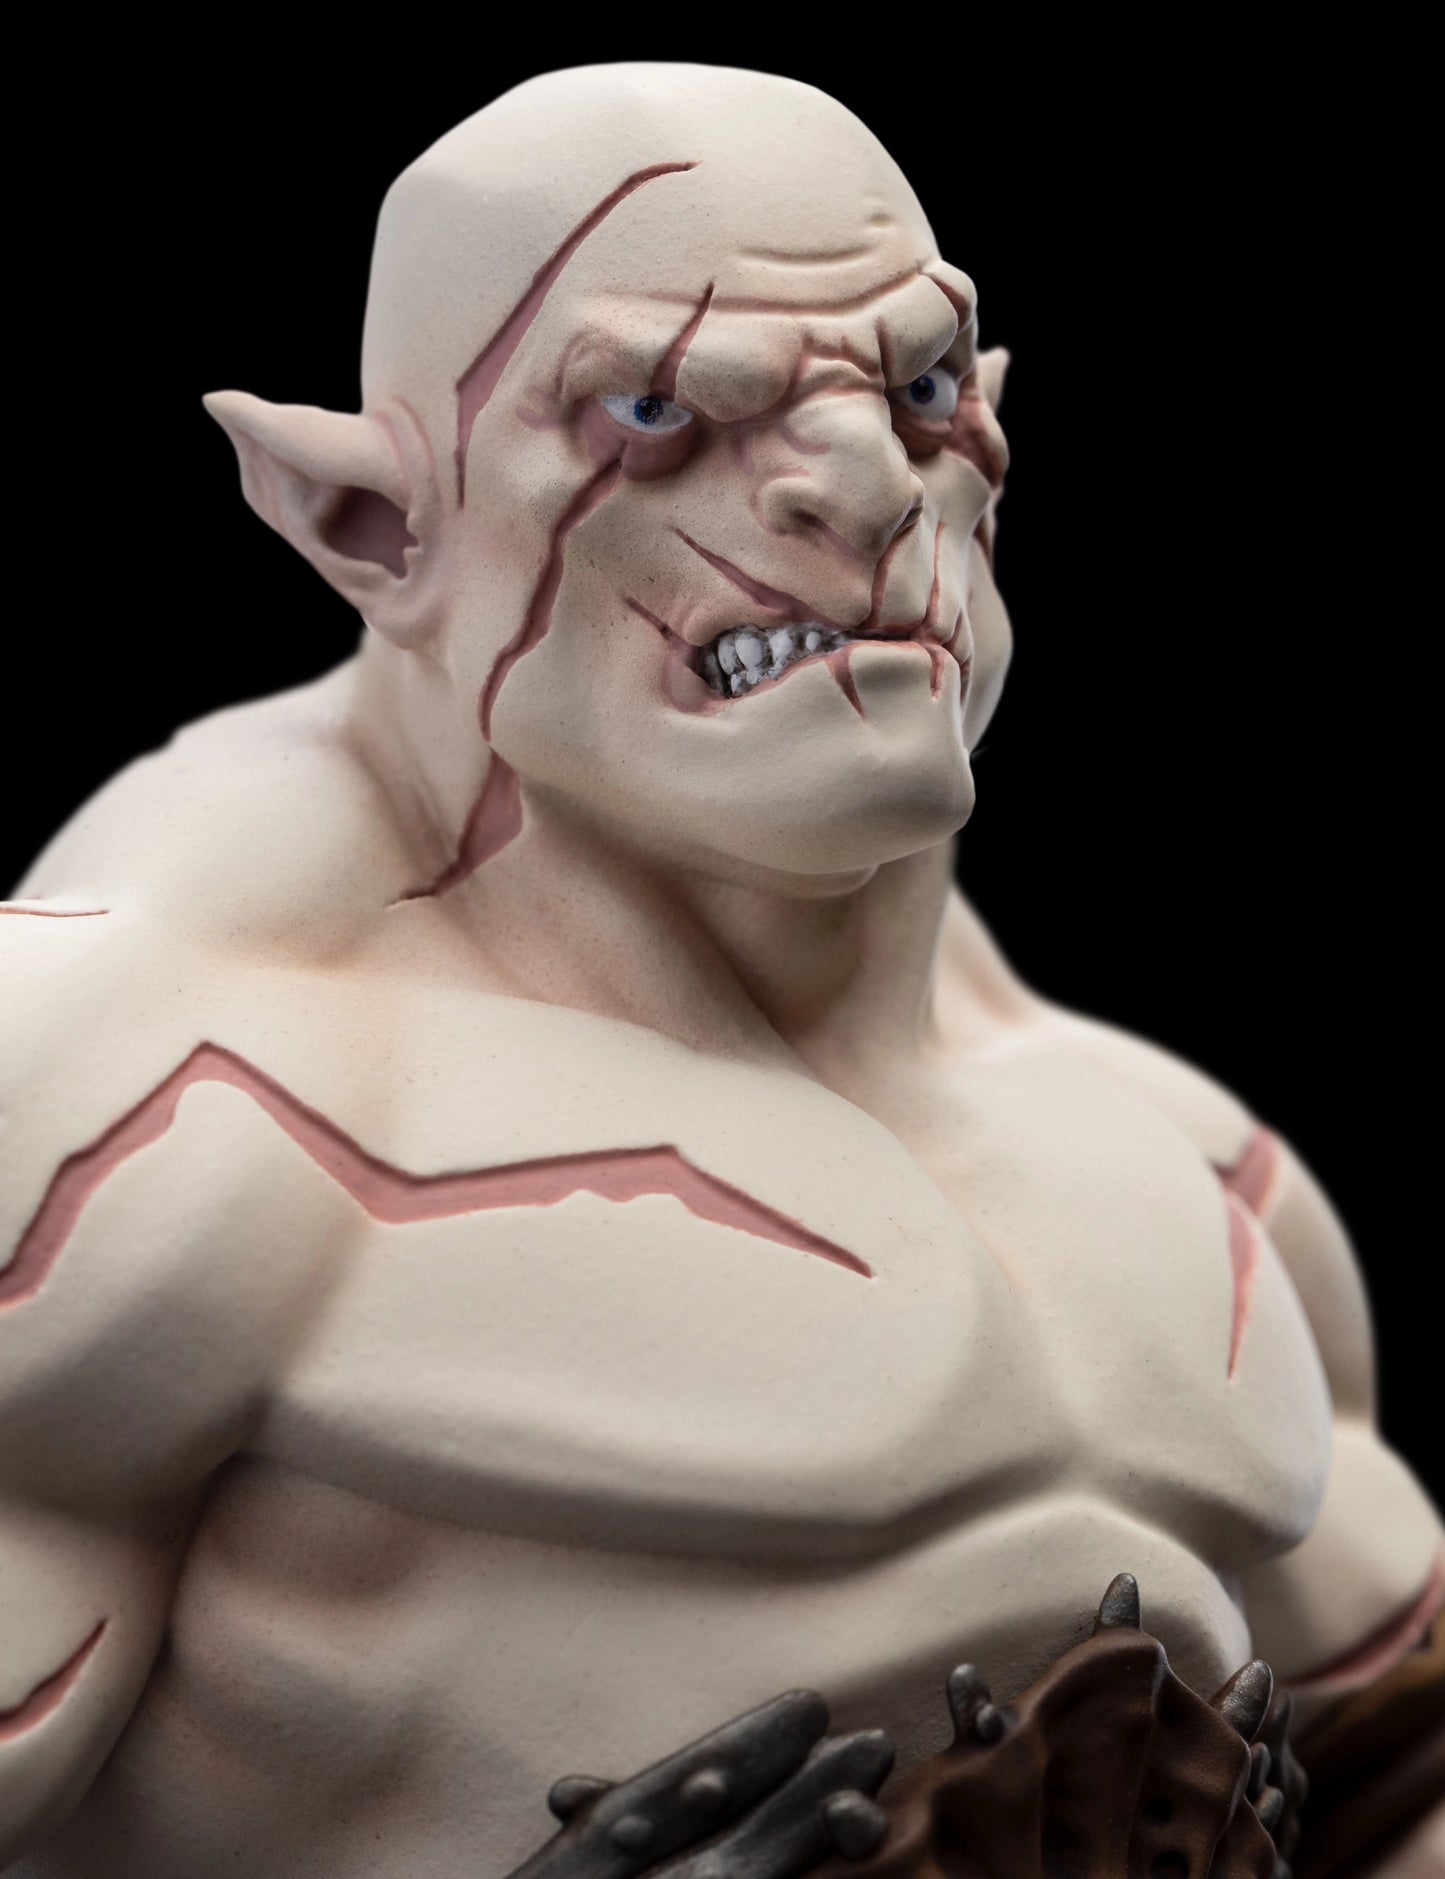 Azog the Defiler with Warg Pup (The Hobbit) Limited Edition Mini Epics Vinyl Statue